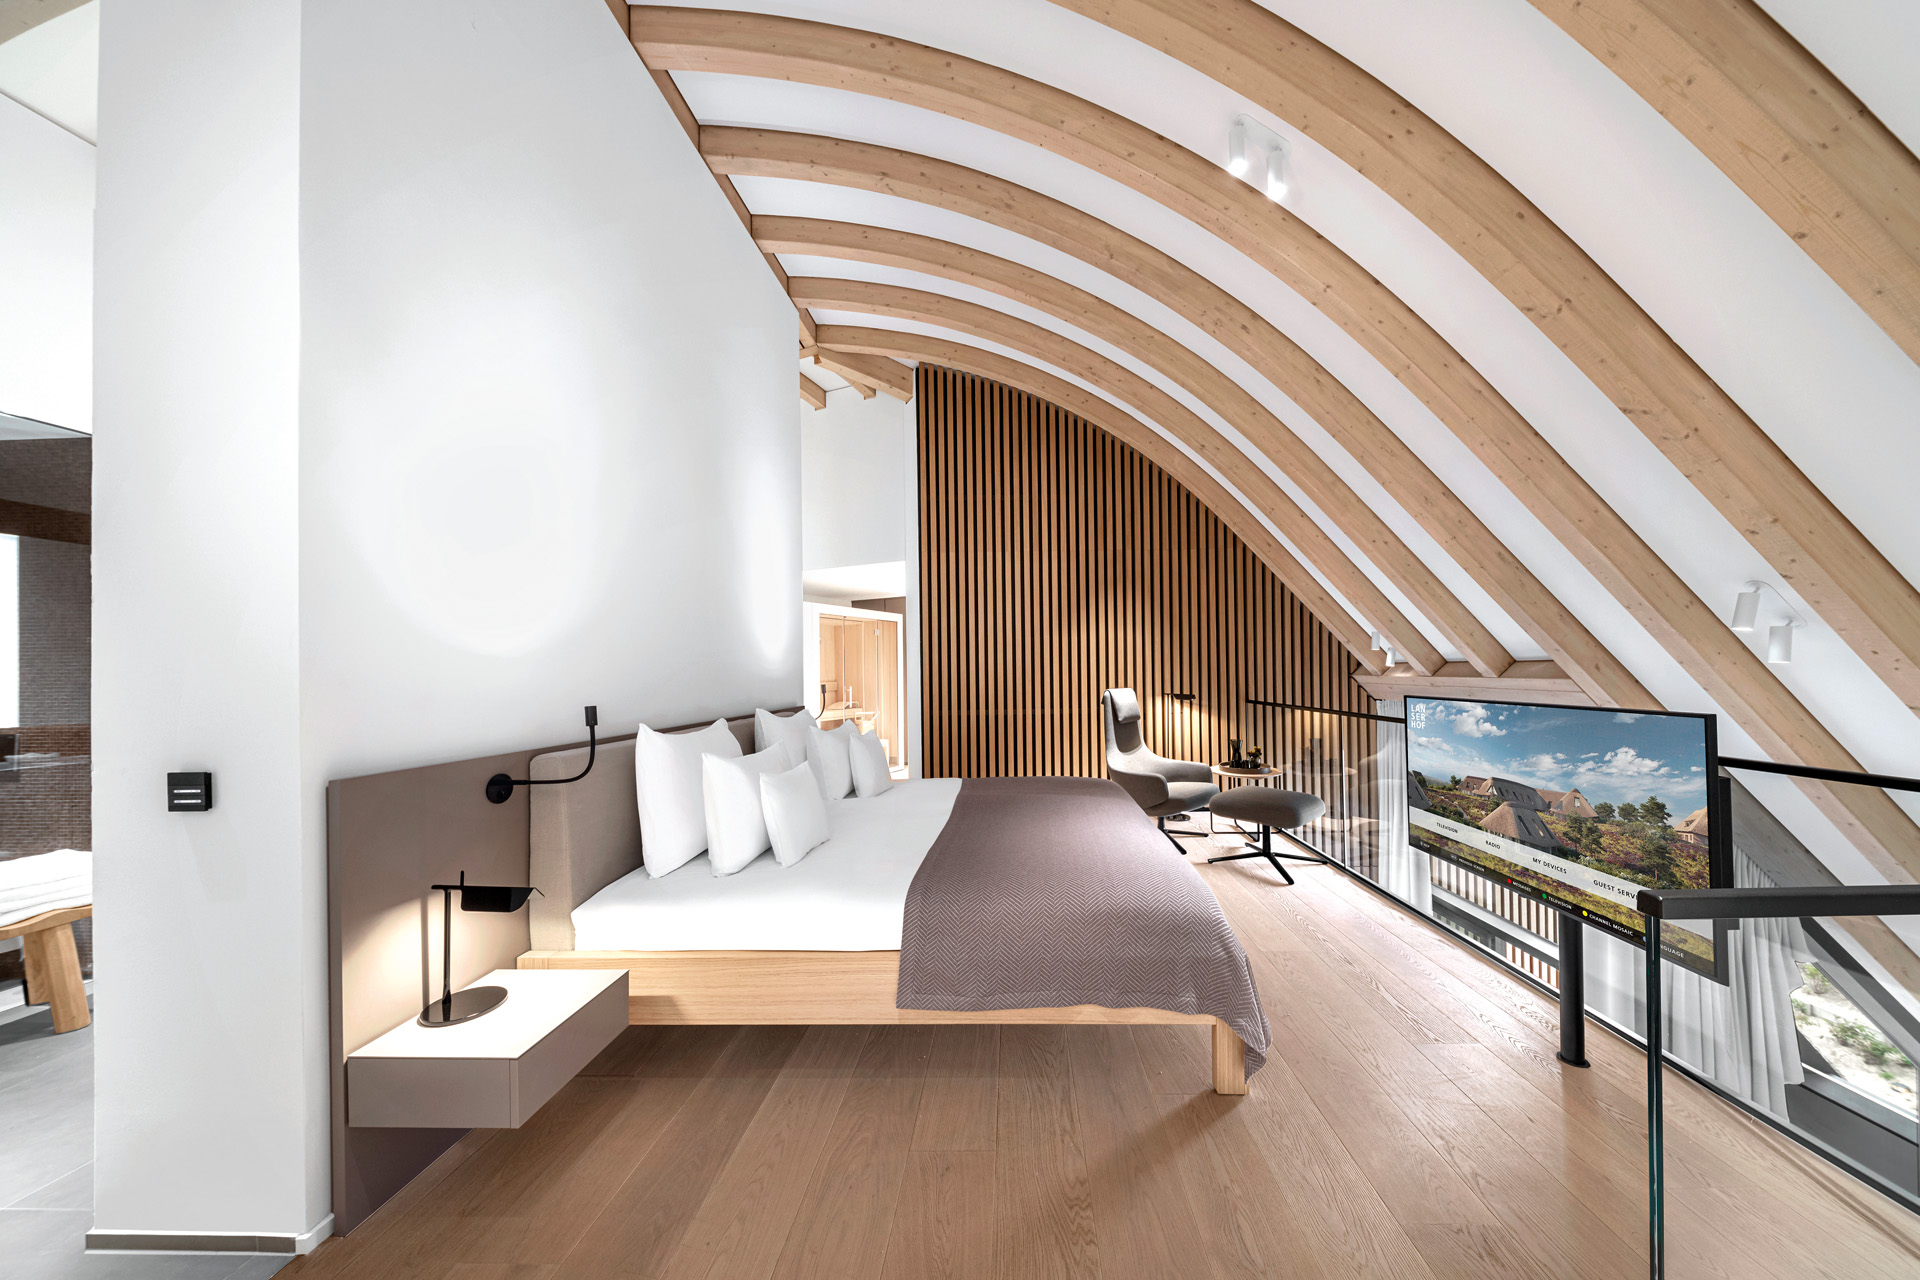 A suite with a TV and curved ceiling